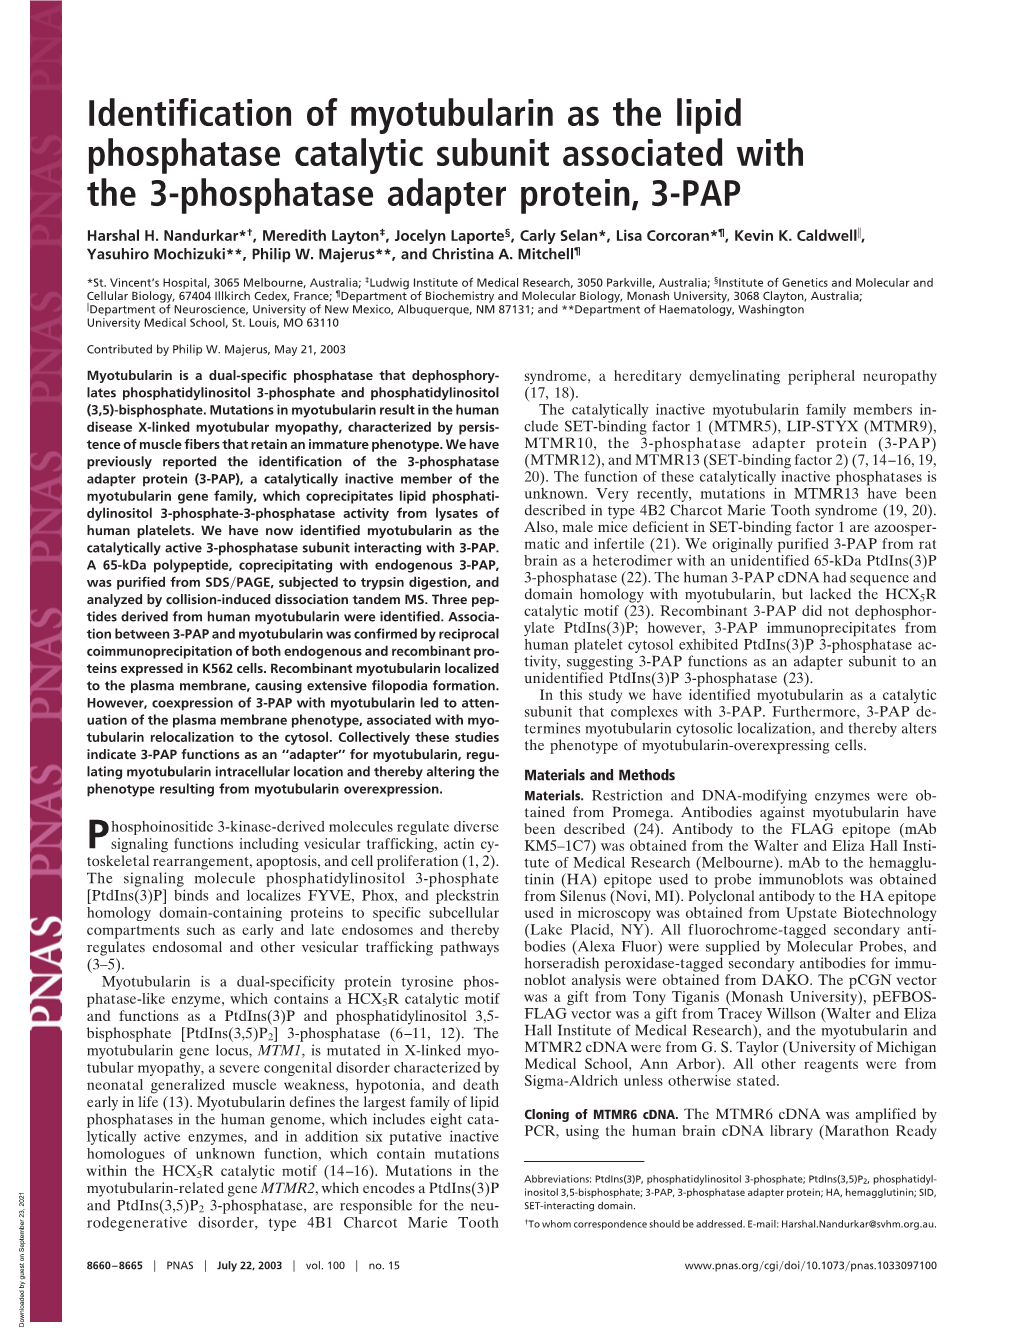 Identification of Myotubularin As the Lipid Phosphatase Catalytic Subunit Associated with the 3-Phosphatase Adapter Protein, 3-PAP